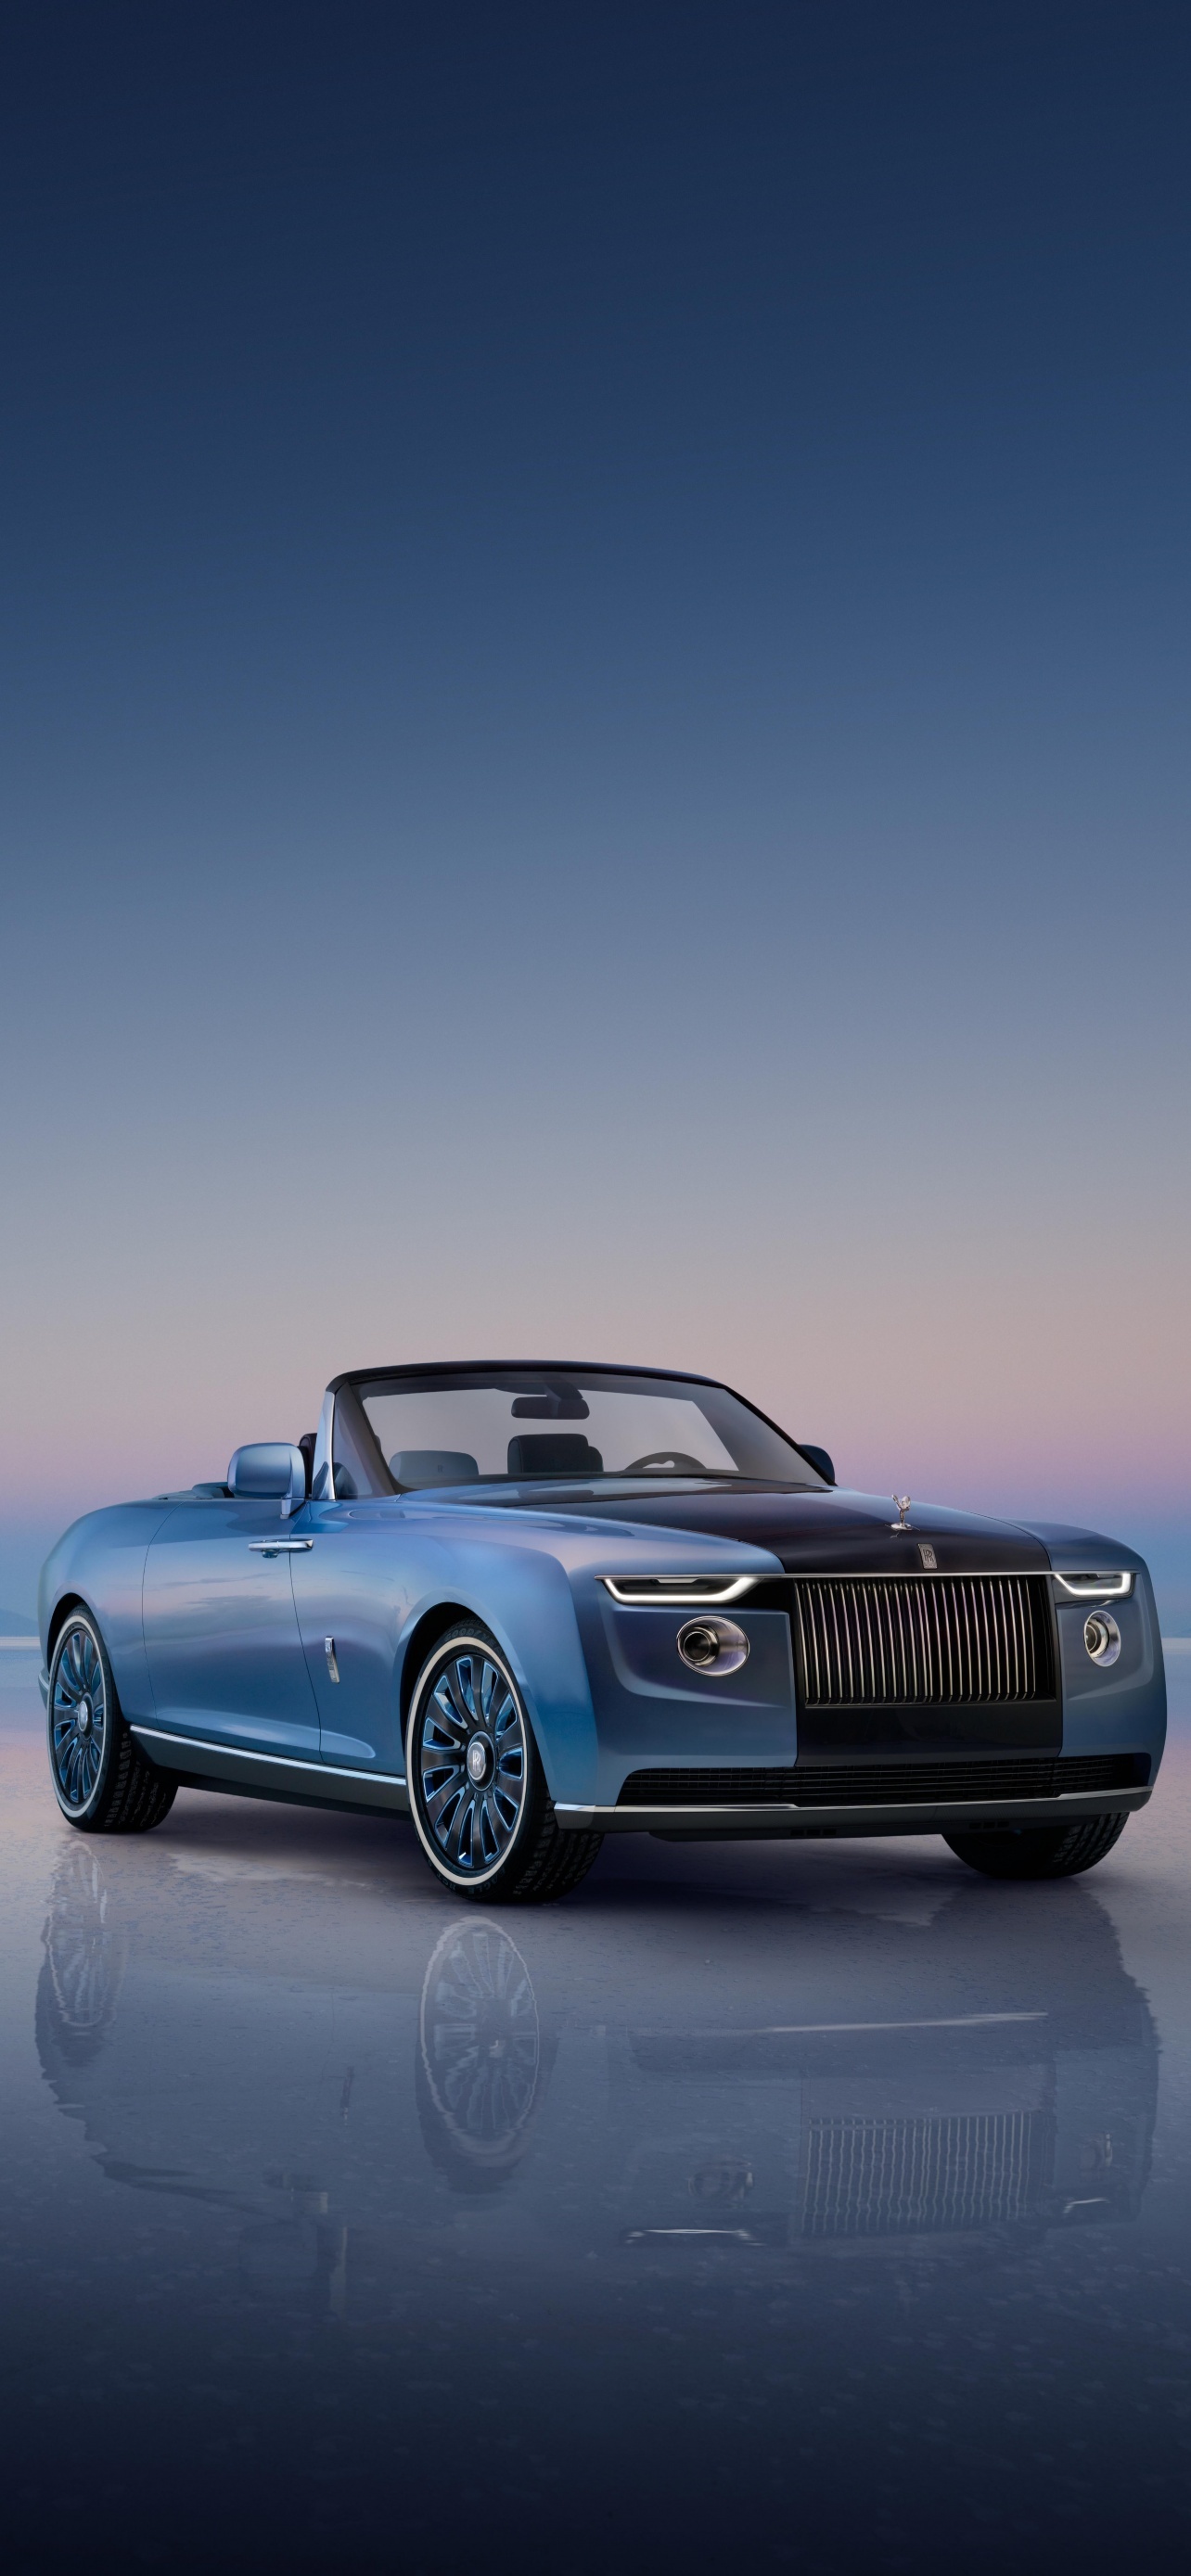 Rolls-Royce Dawn, Boat tail beauty, World's most expensive cars, 5K and 8K wallpapers, 1290x2780 HD Handy